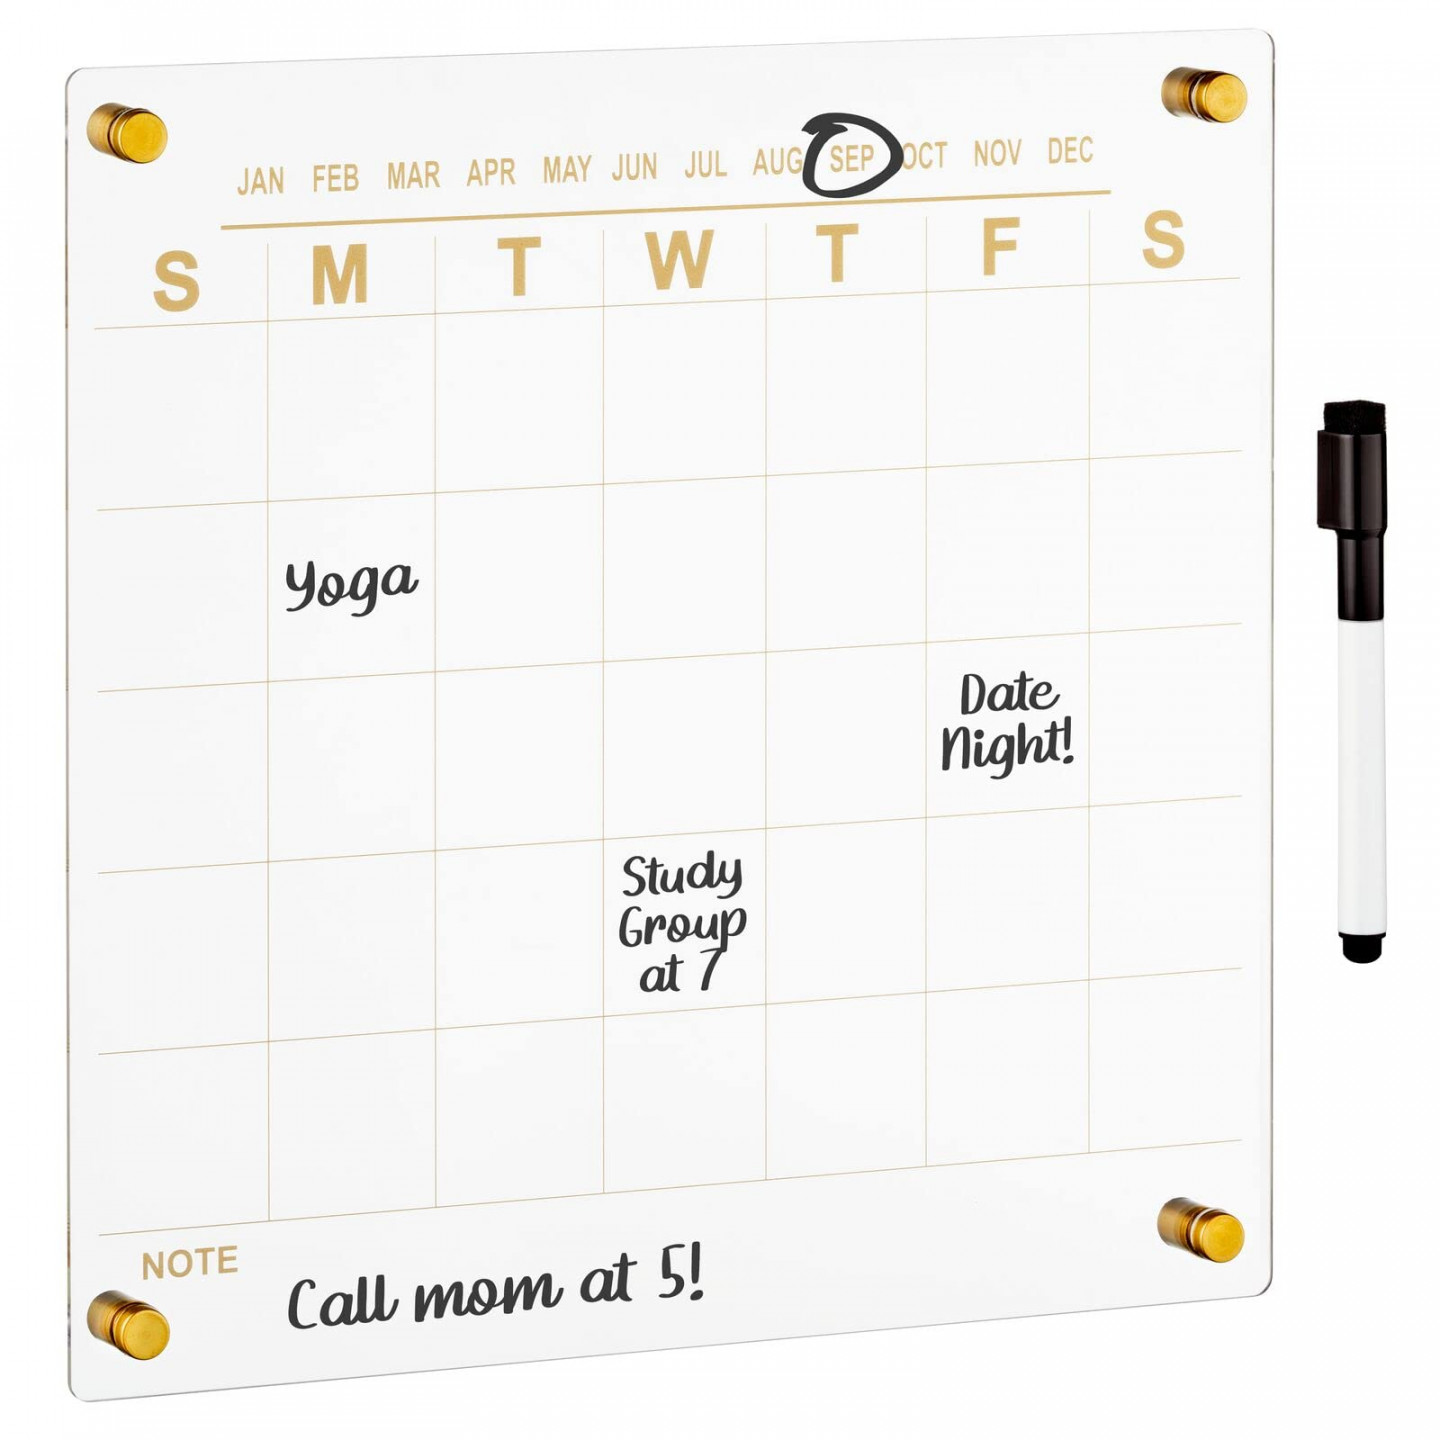 mDesign Modern Acrylic Calendar for Wall with Dry Erase Marker - Wall Mount  Monthly Planner Board foSee more mDesign Modern Acrylic Calendar for Wall